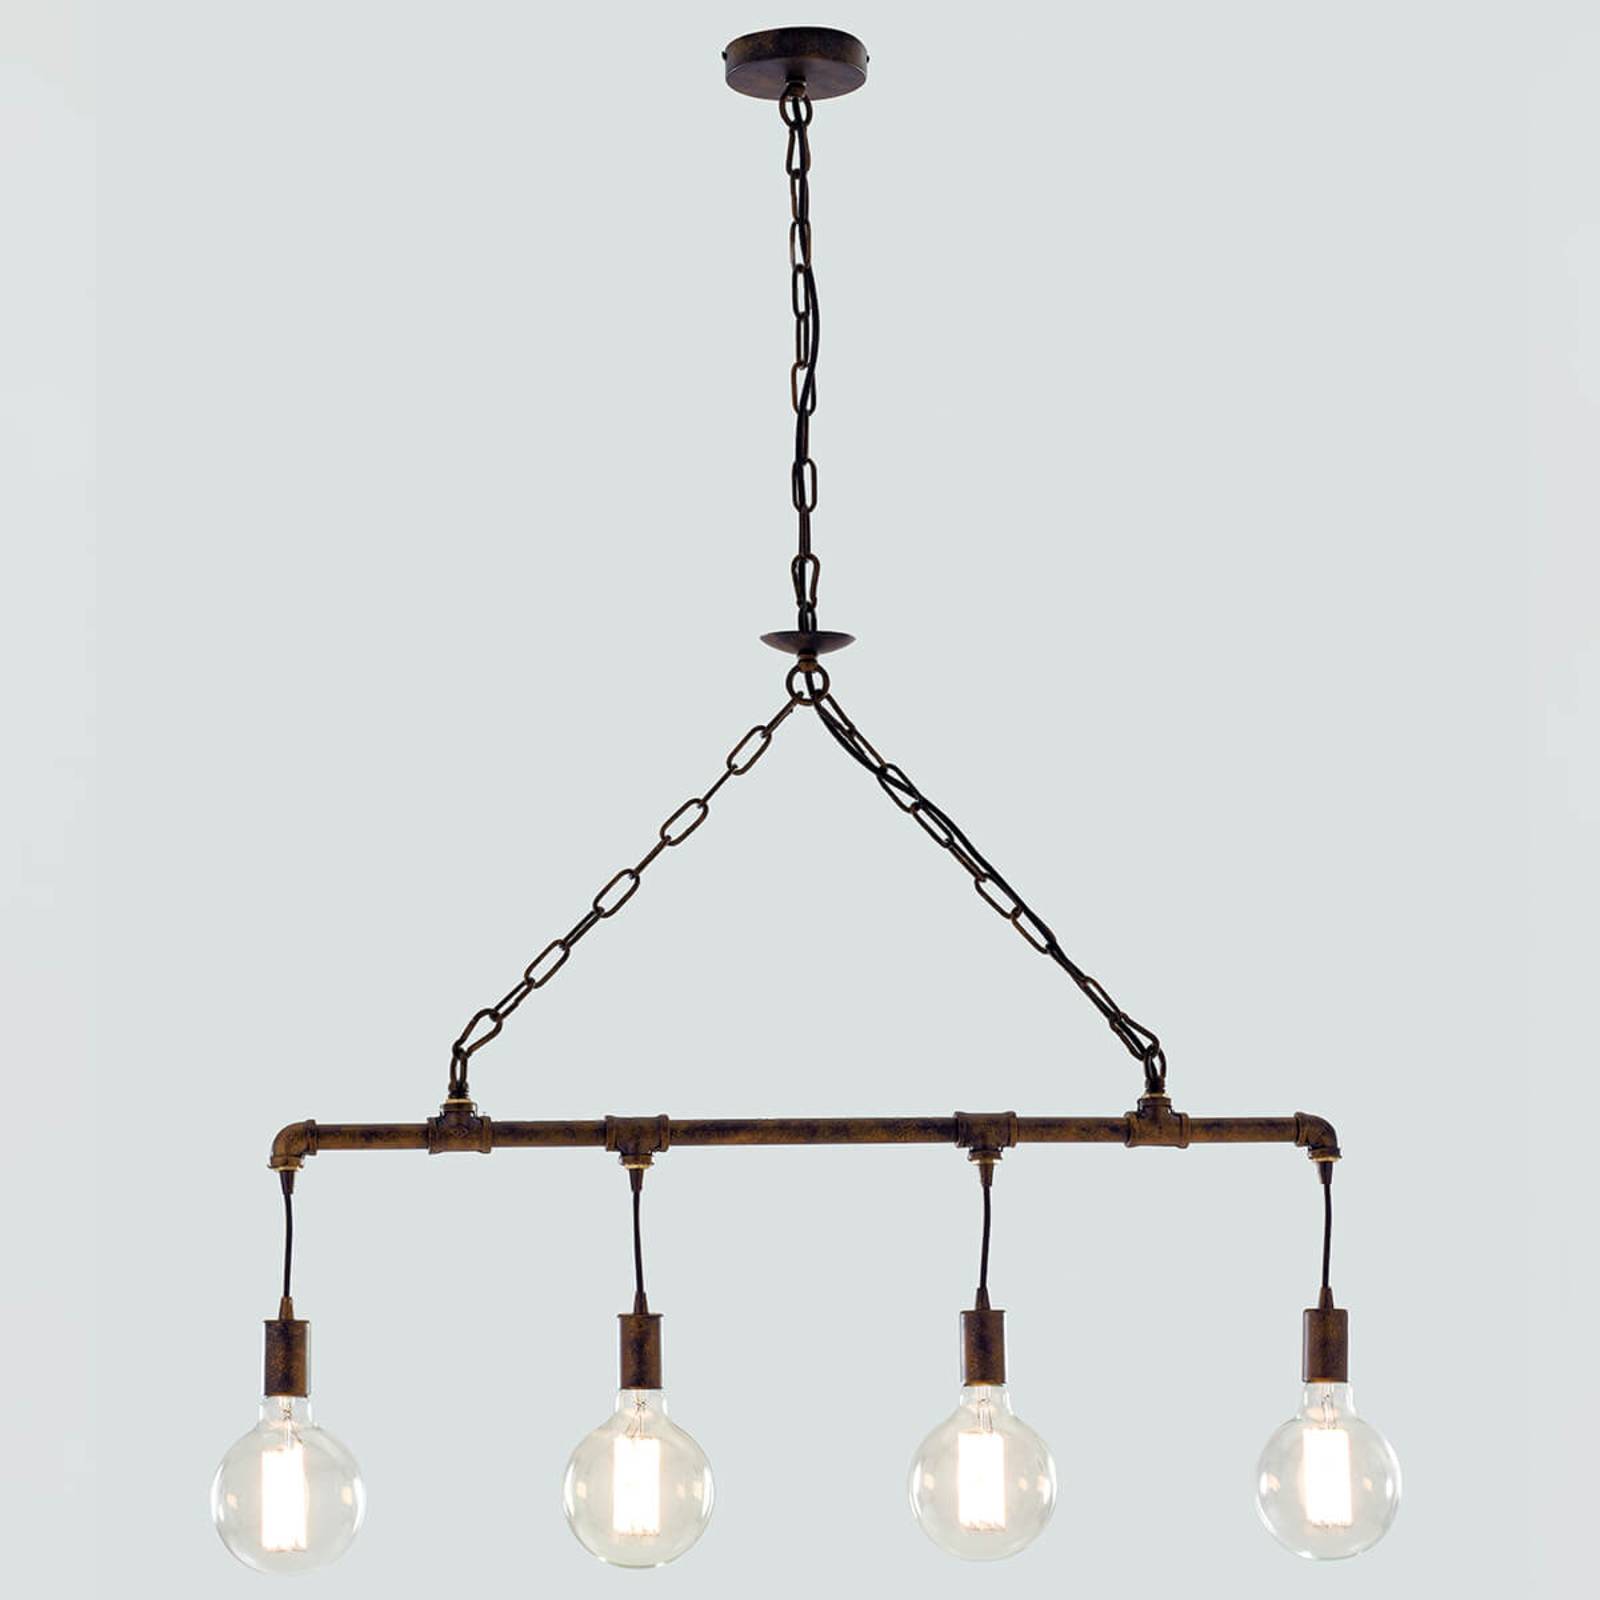 Photos - Chandelier / Lamp Eco-Light Hanging light Amarcord in an industrial design 